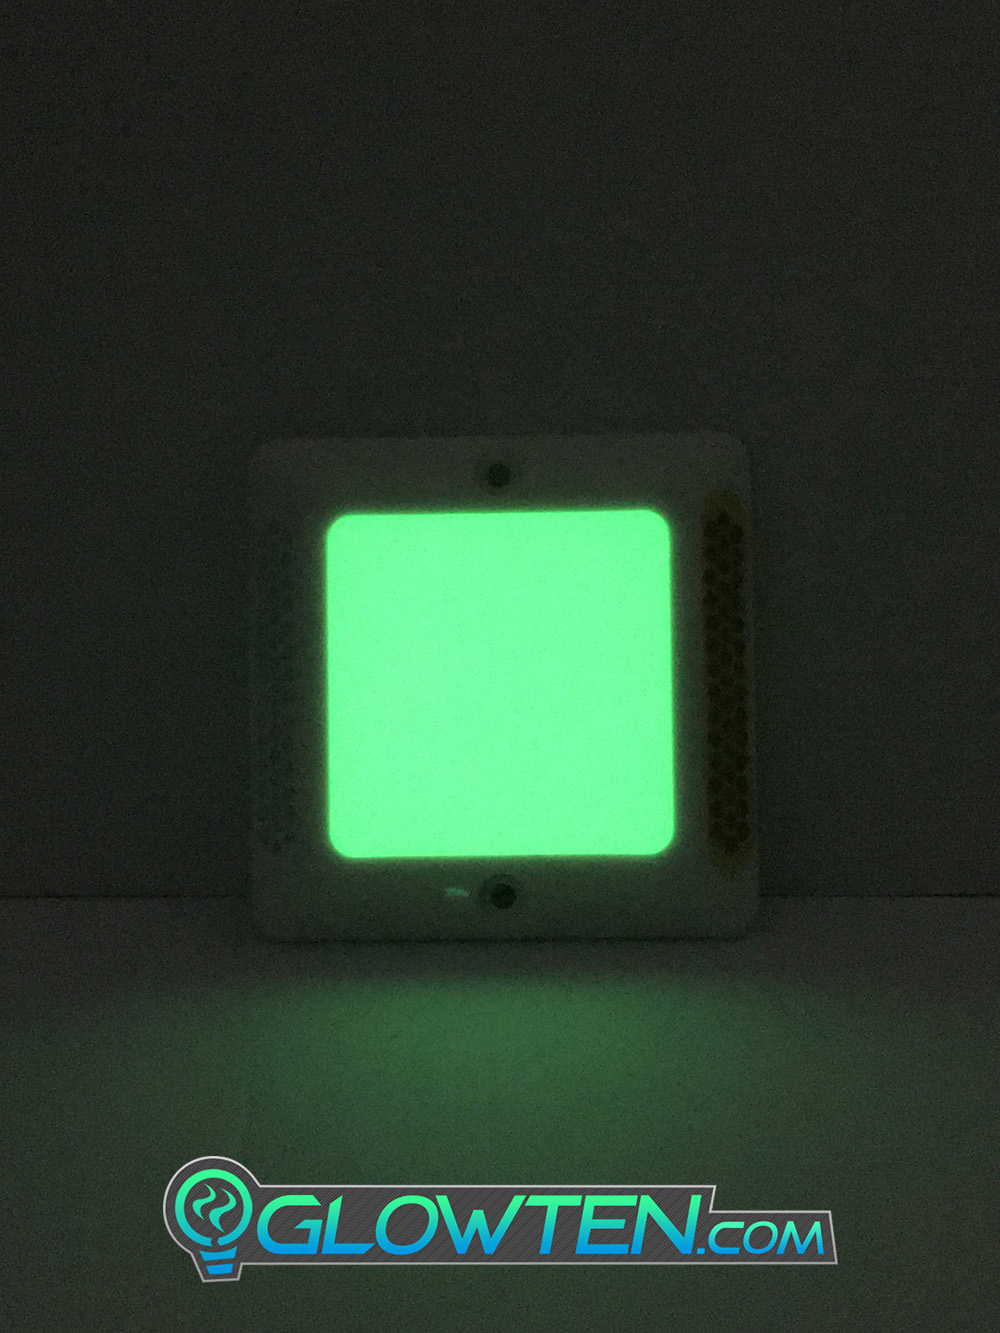 GLOWTEN.com - Glow in the Dark Shiny GREEN SQUARE BLOCK Riser Luminous road studs, road turtles Reflective Road Traffic Pavement Marker Road Sign Reflector ABS Body Material Photo Luminescent Paint Flourescent Green road studs, road turtles Decal picture photo cap preview pic image search 2